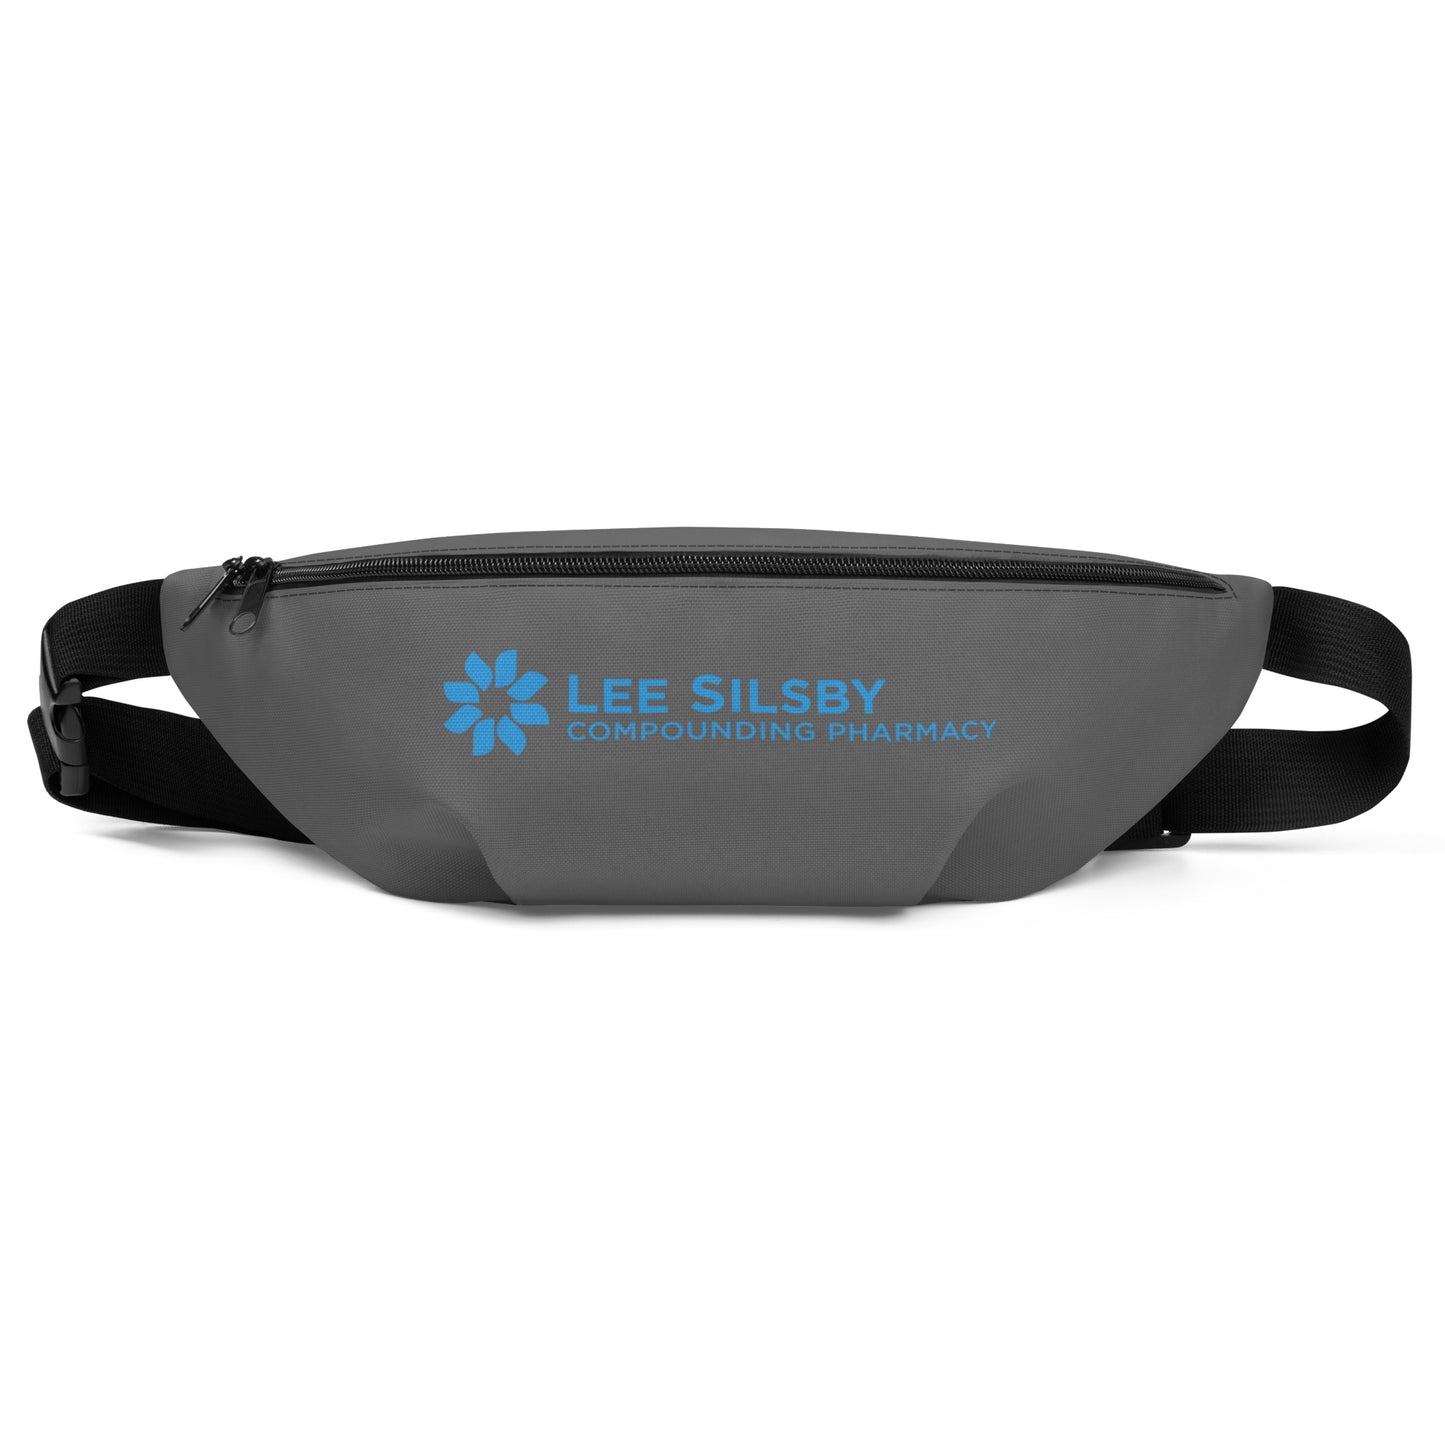 All-Over Print Fanny-pack - Lee Silsby